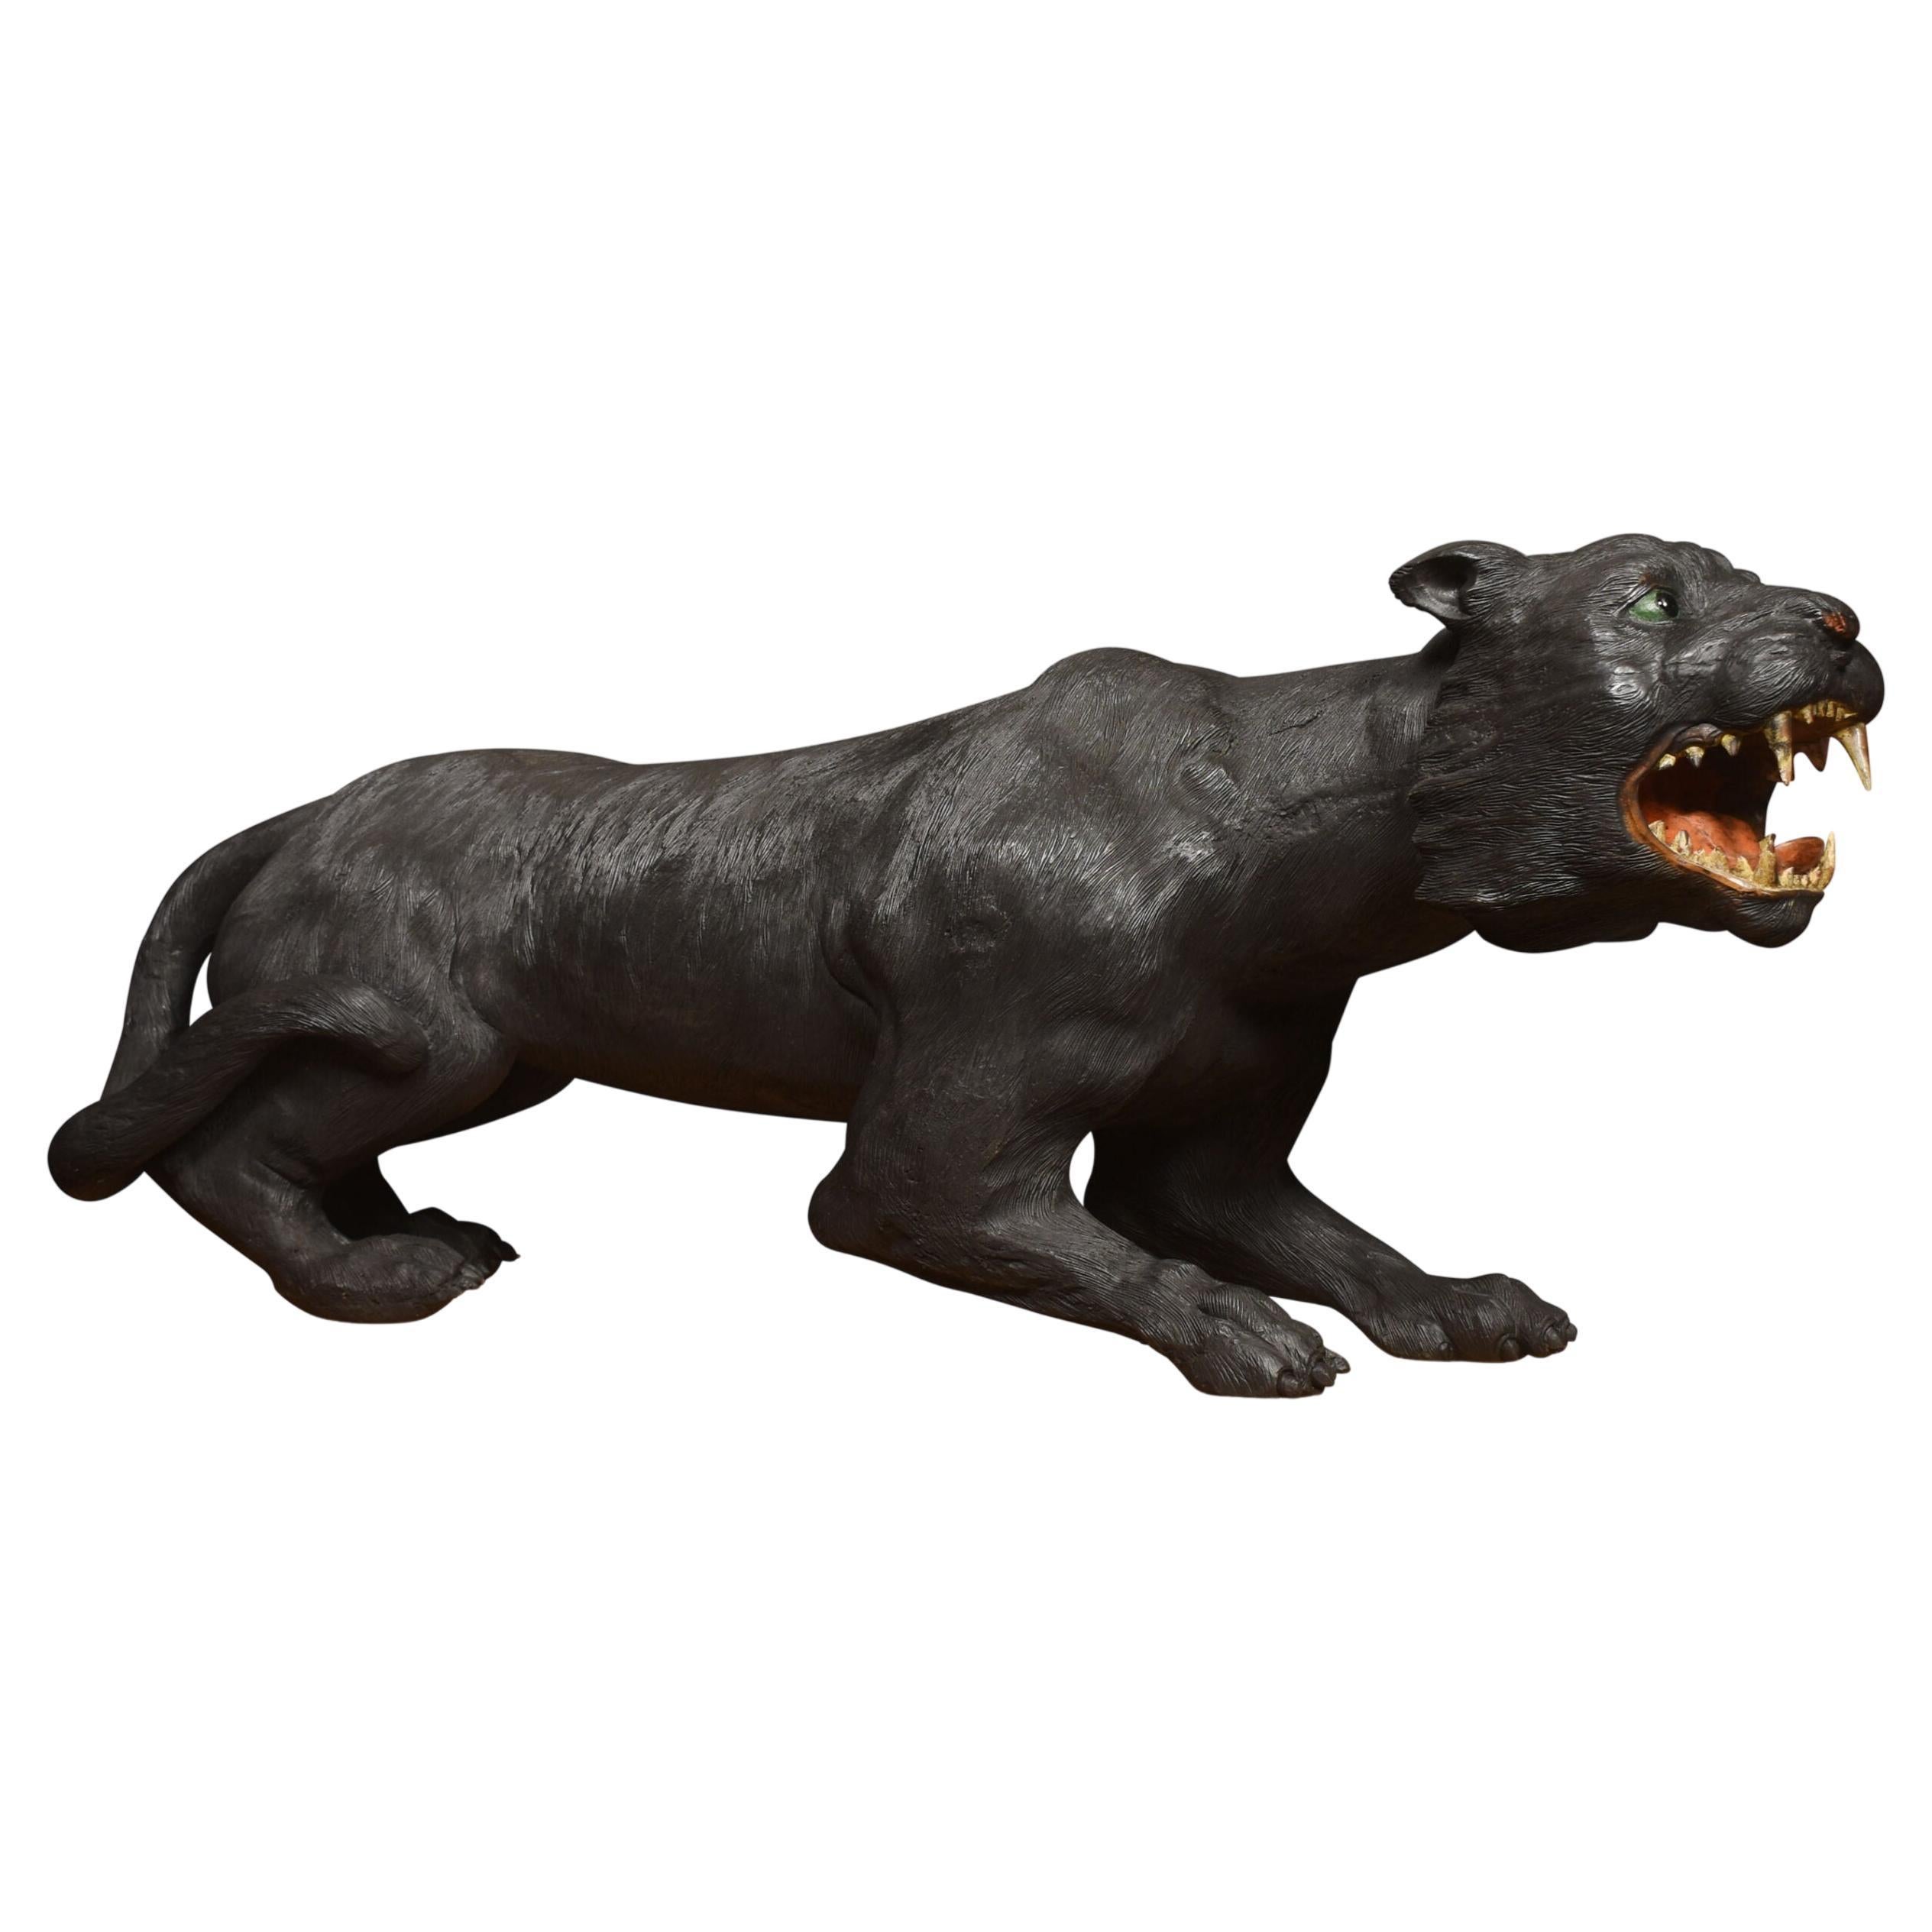 19th Century Carved Black Panther